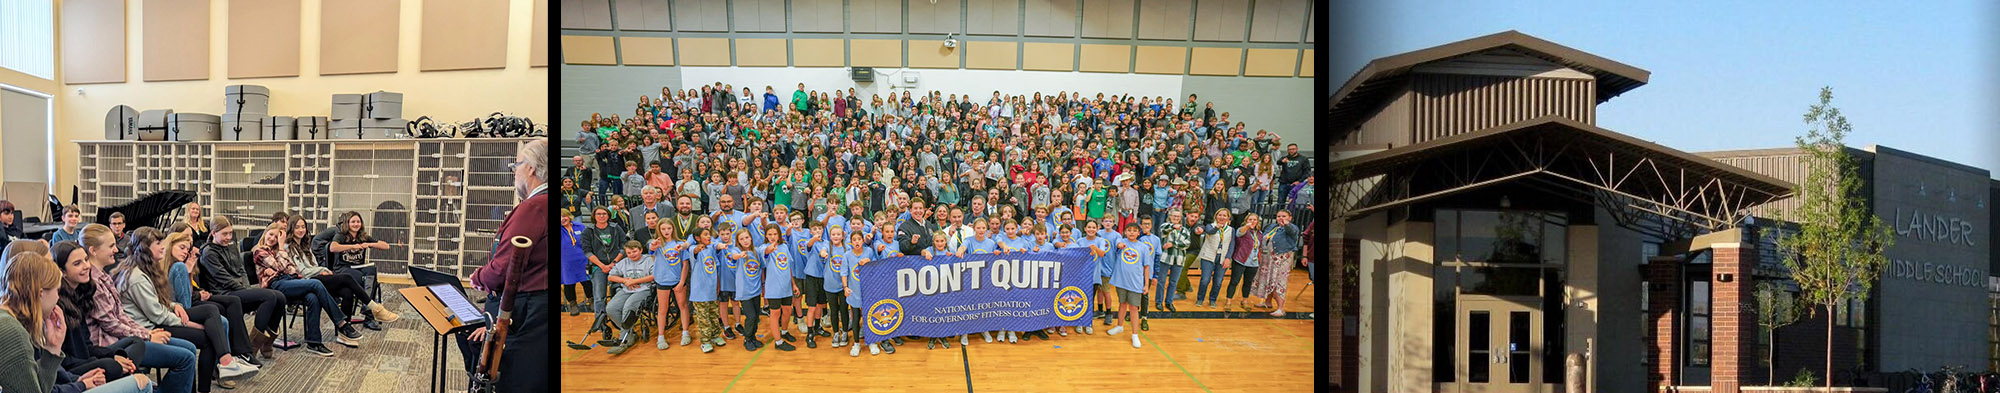 Students holding up Homecoming banner, Group of students at Don't Quit Assembly, and front view of Lander Middle School